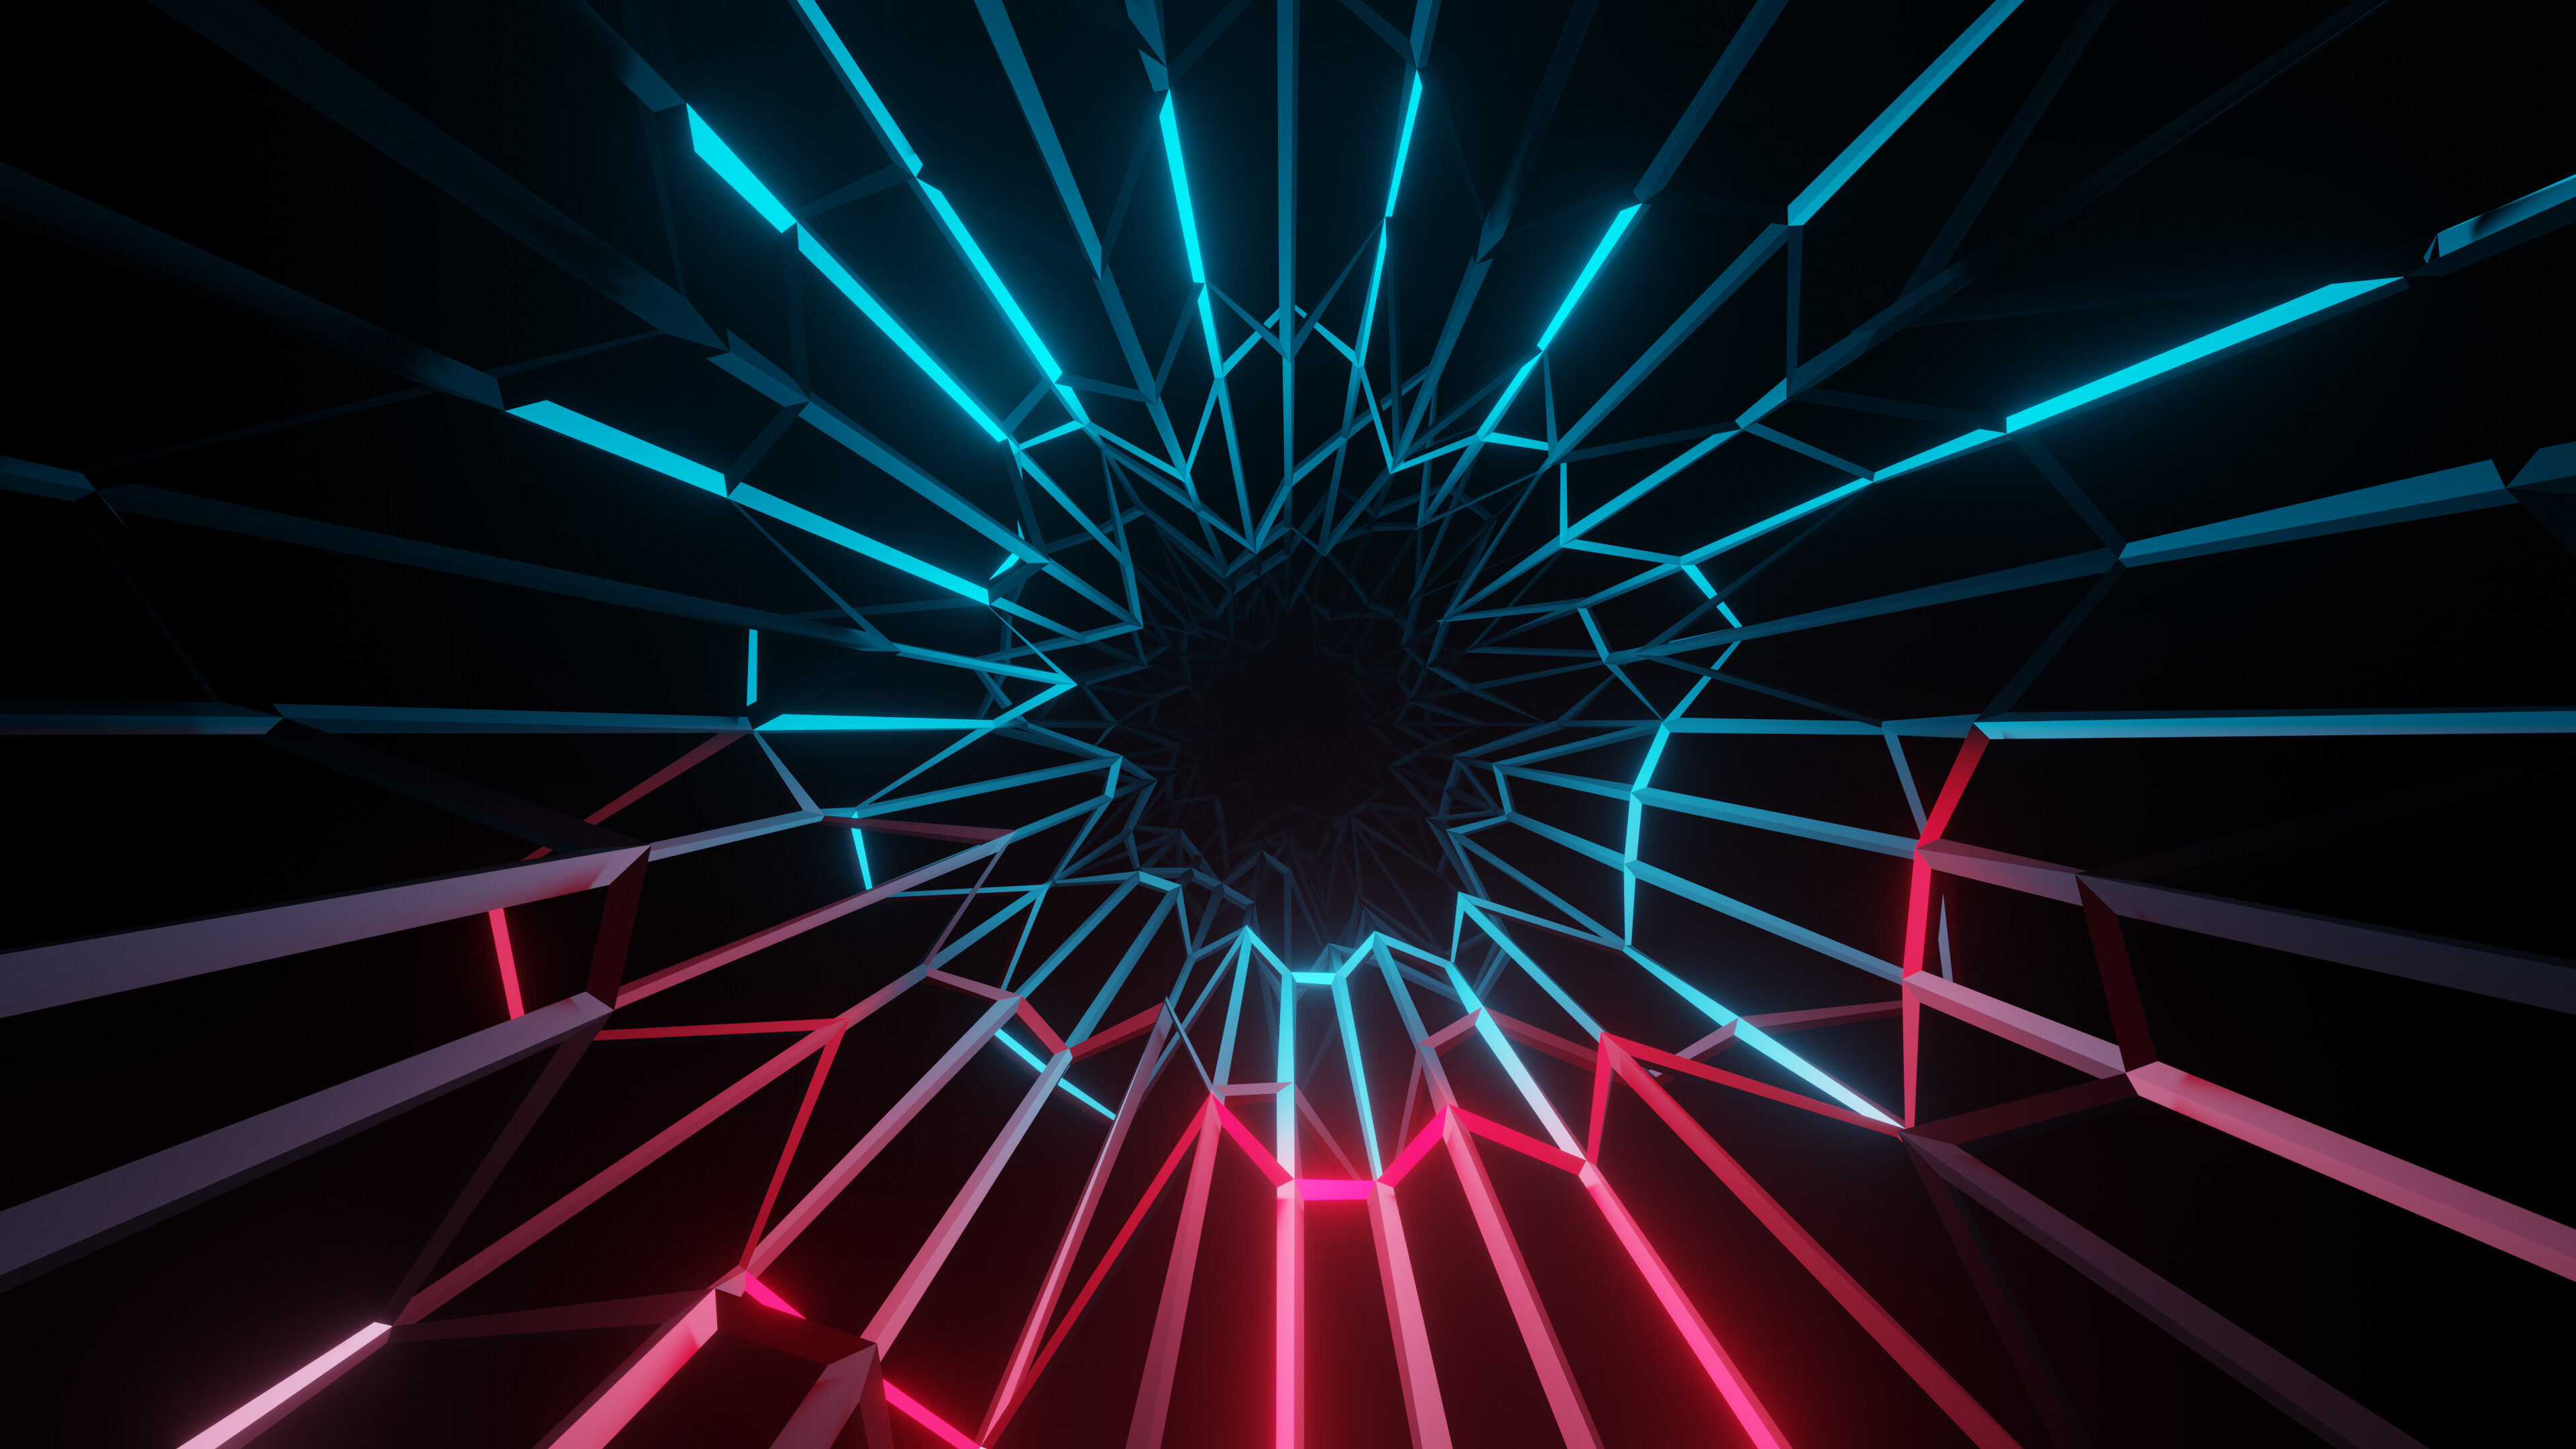 Glow in the Dark: Abstract, Luminous lines, Visual effect lighting. 3840x2160 4K Background.